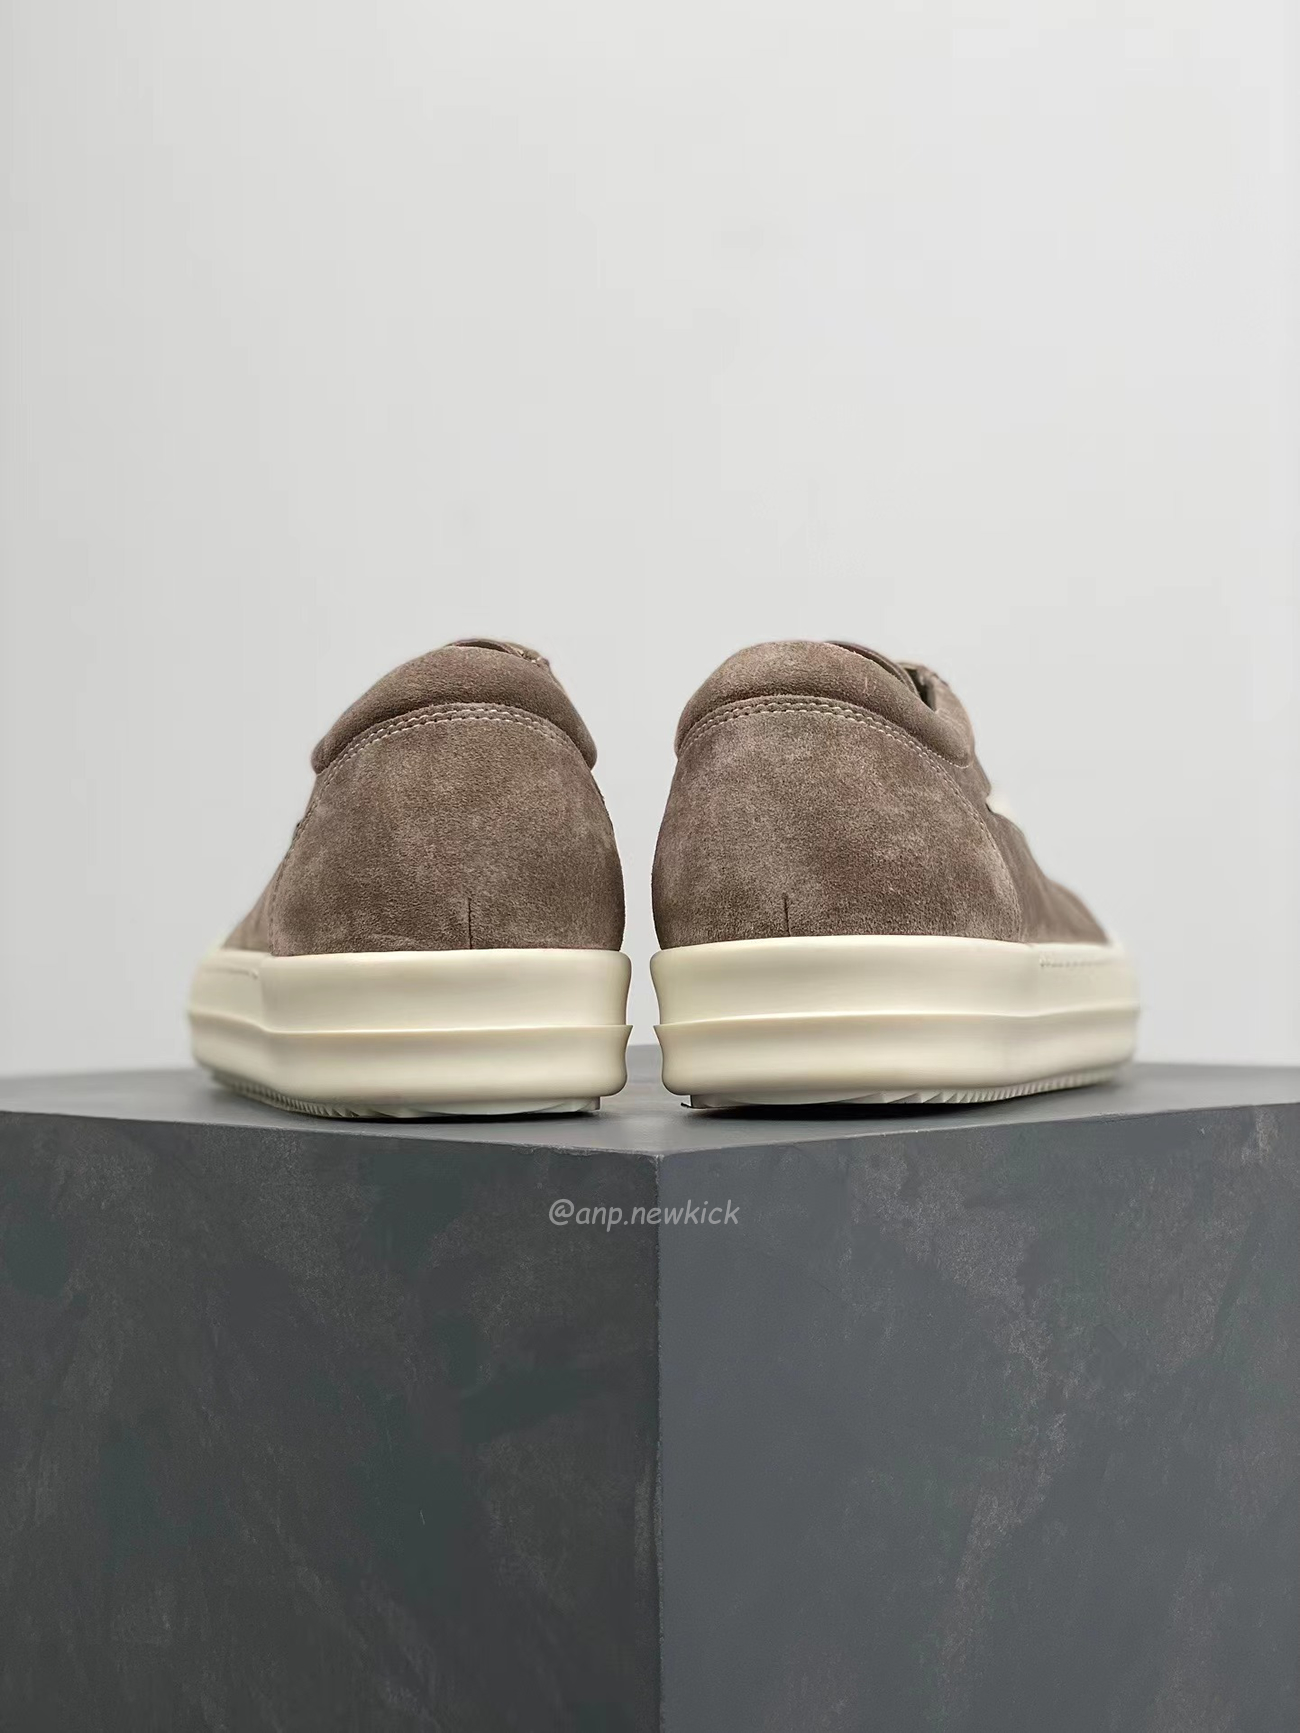 Rick Owens Leather Low Top Vintage Sneakers Suede Canvas Black Taupe Grey Faded Pnk Pearl Milk Dark Dust (22) - newkick.org